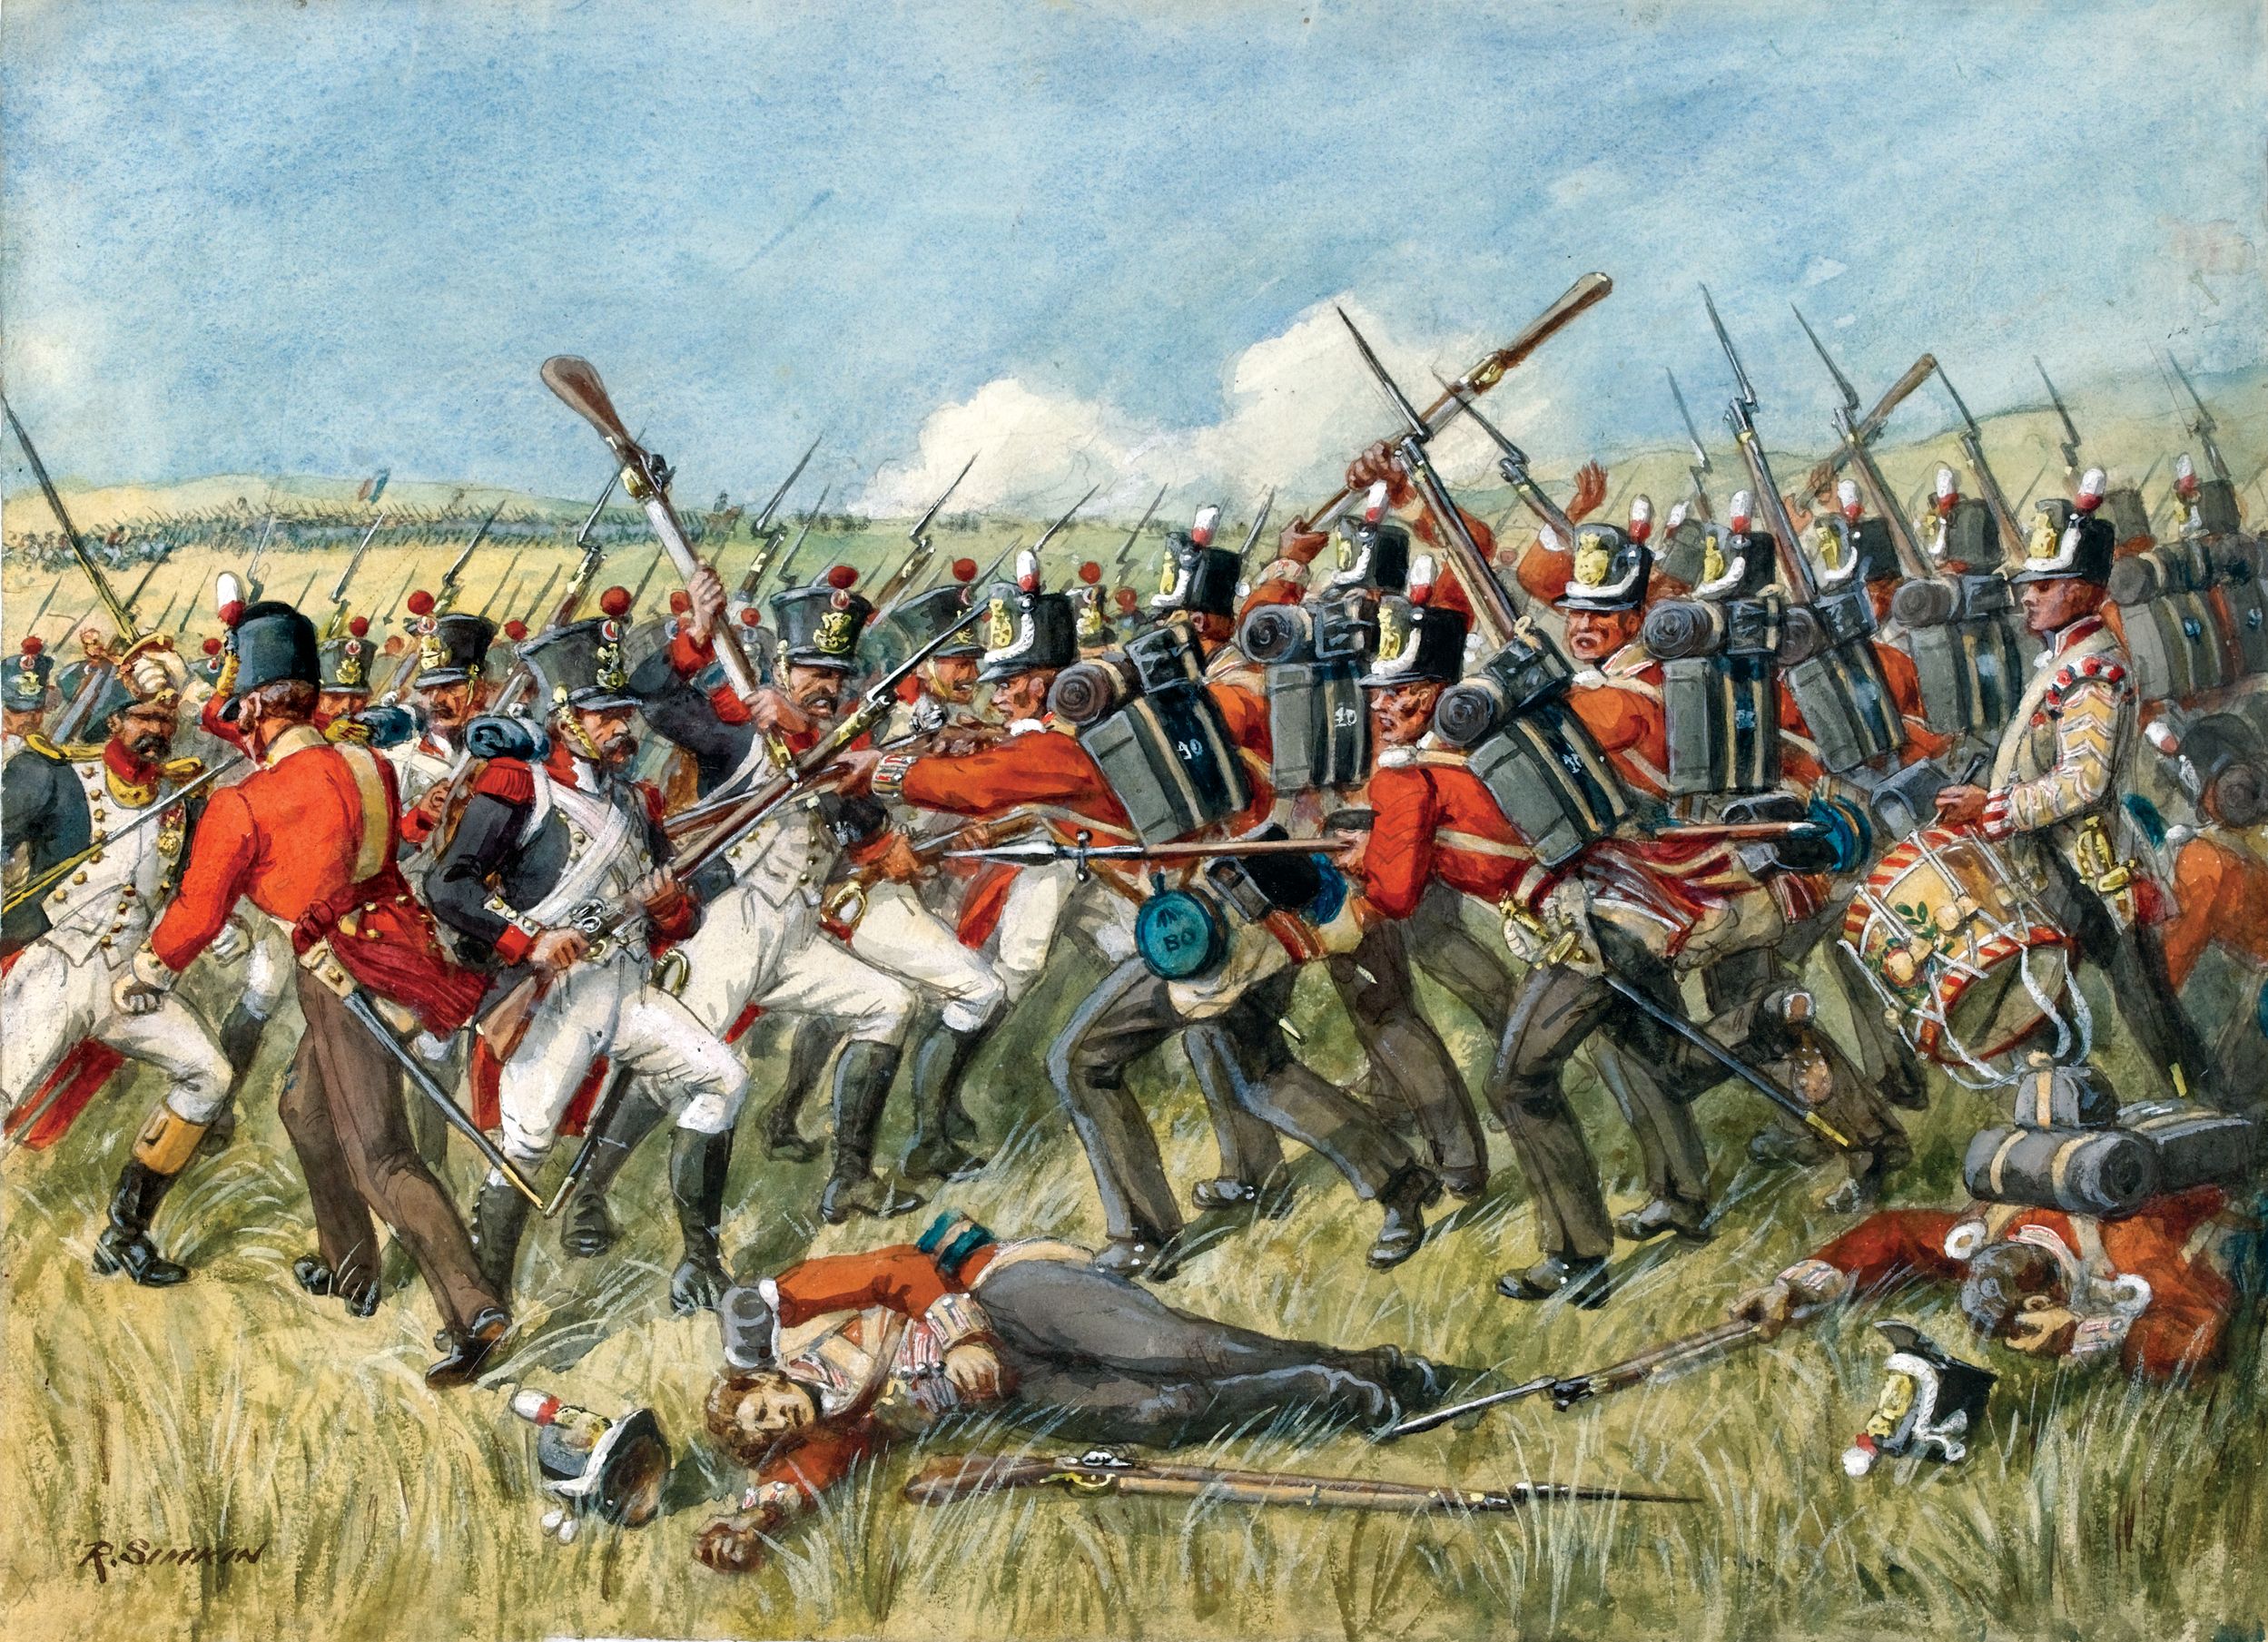 The British 40th Regiment of Foot hurled back a French assault on the Anglo-Spanish center at the height of the battle.